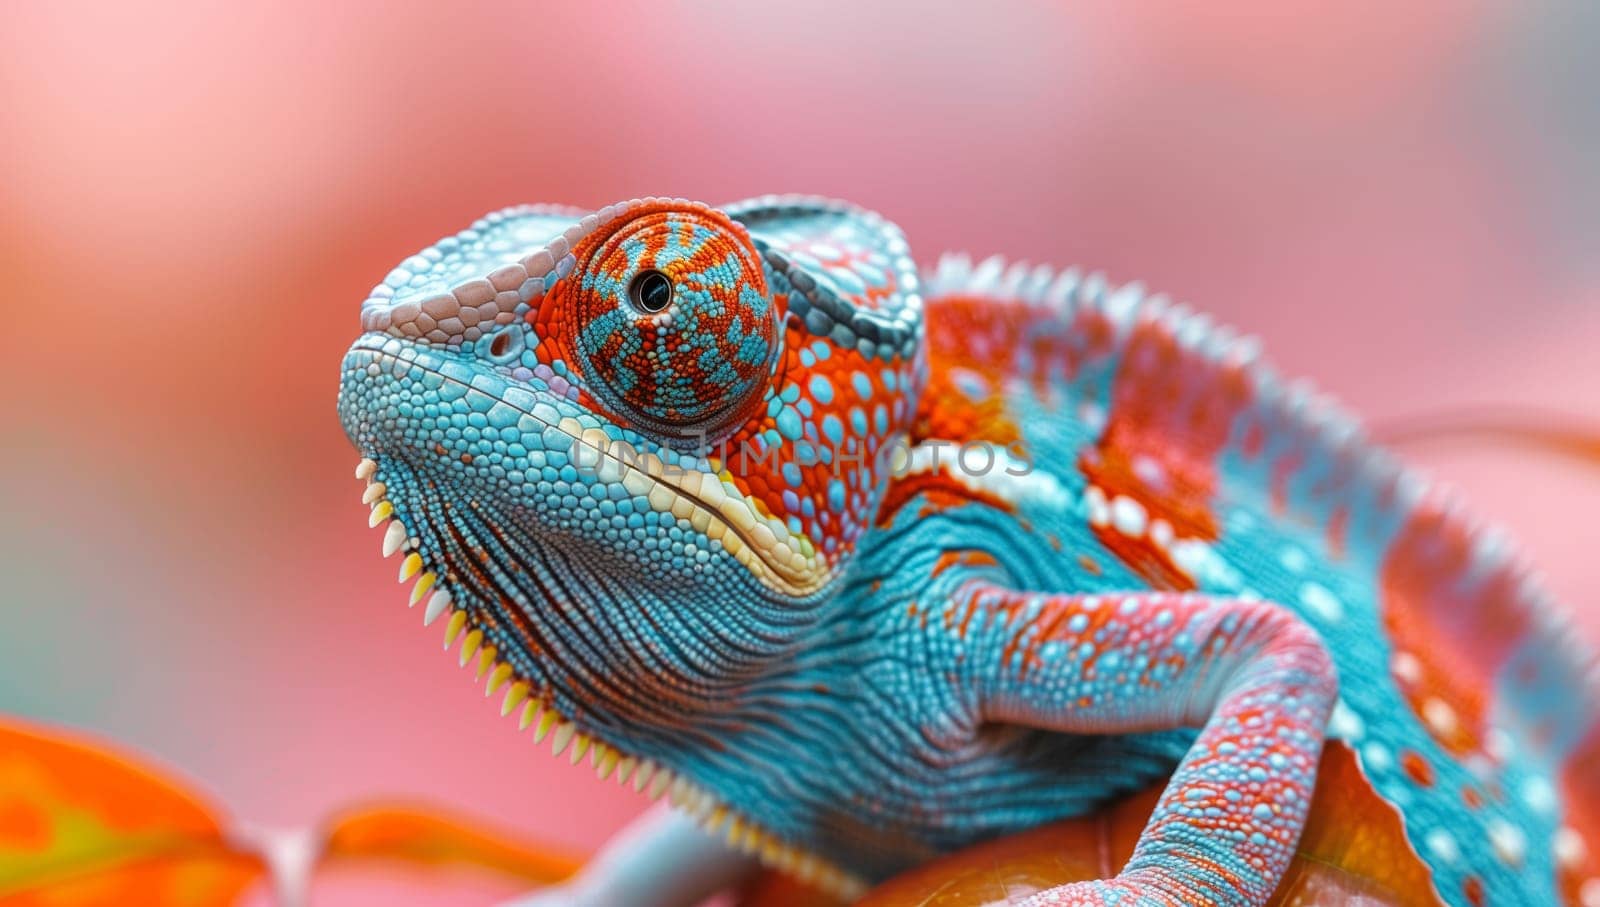 a close up of a colorful chameleon sitting on a leaf by richwolf